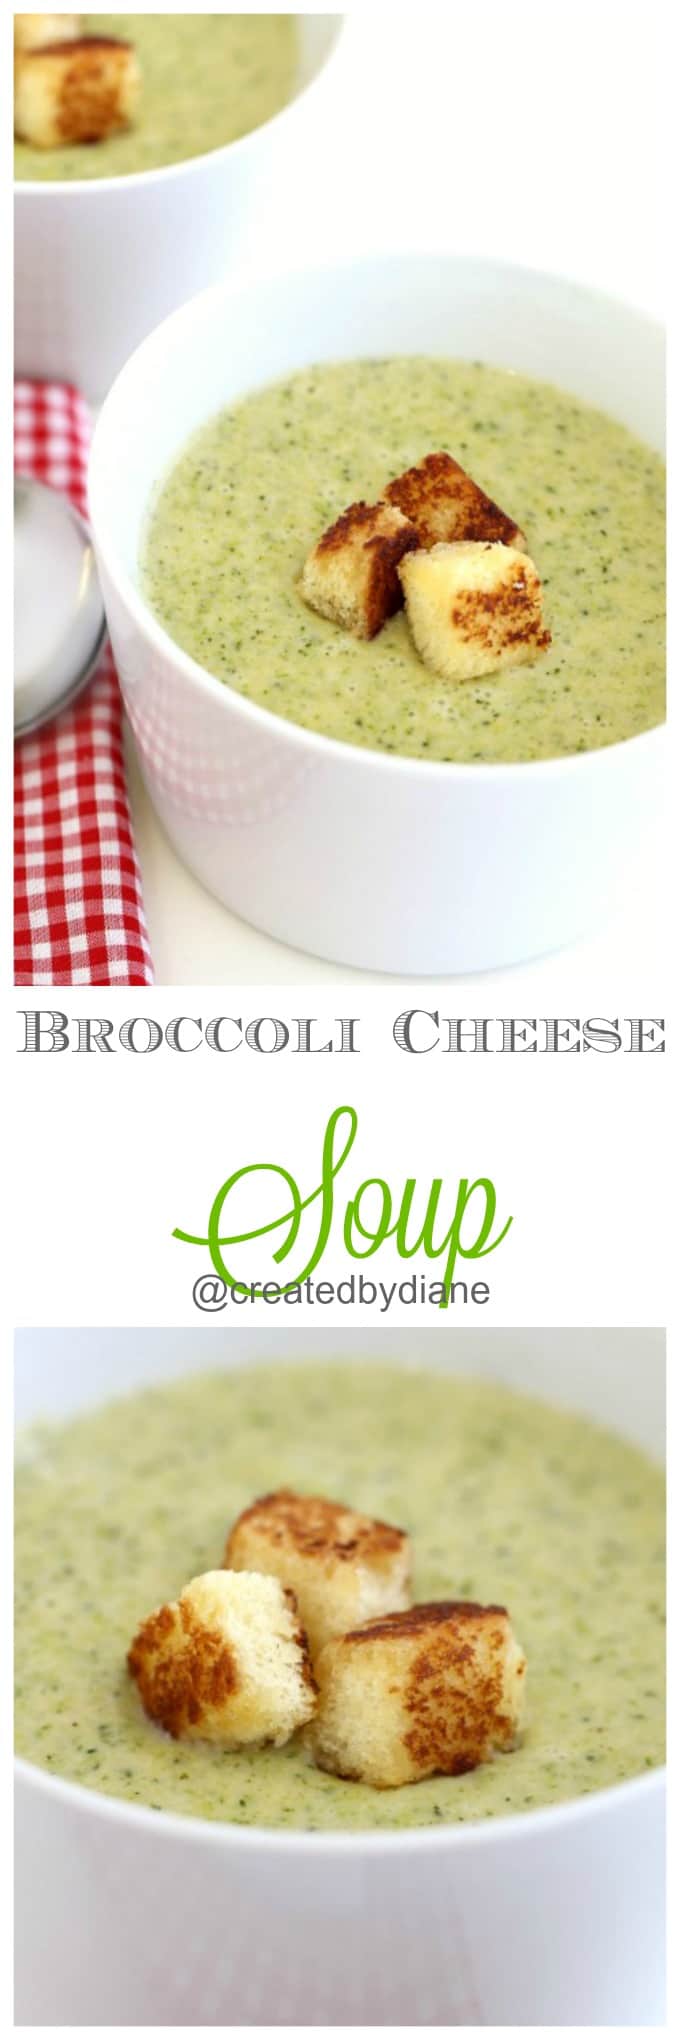 Broccoli Cheese Soup from @createdbydiane